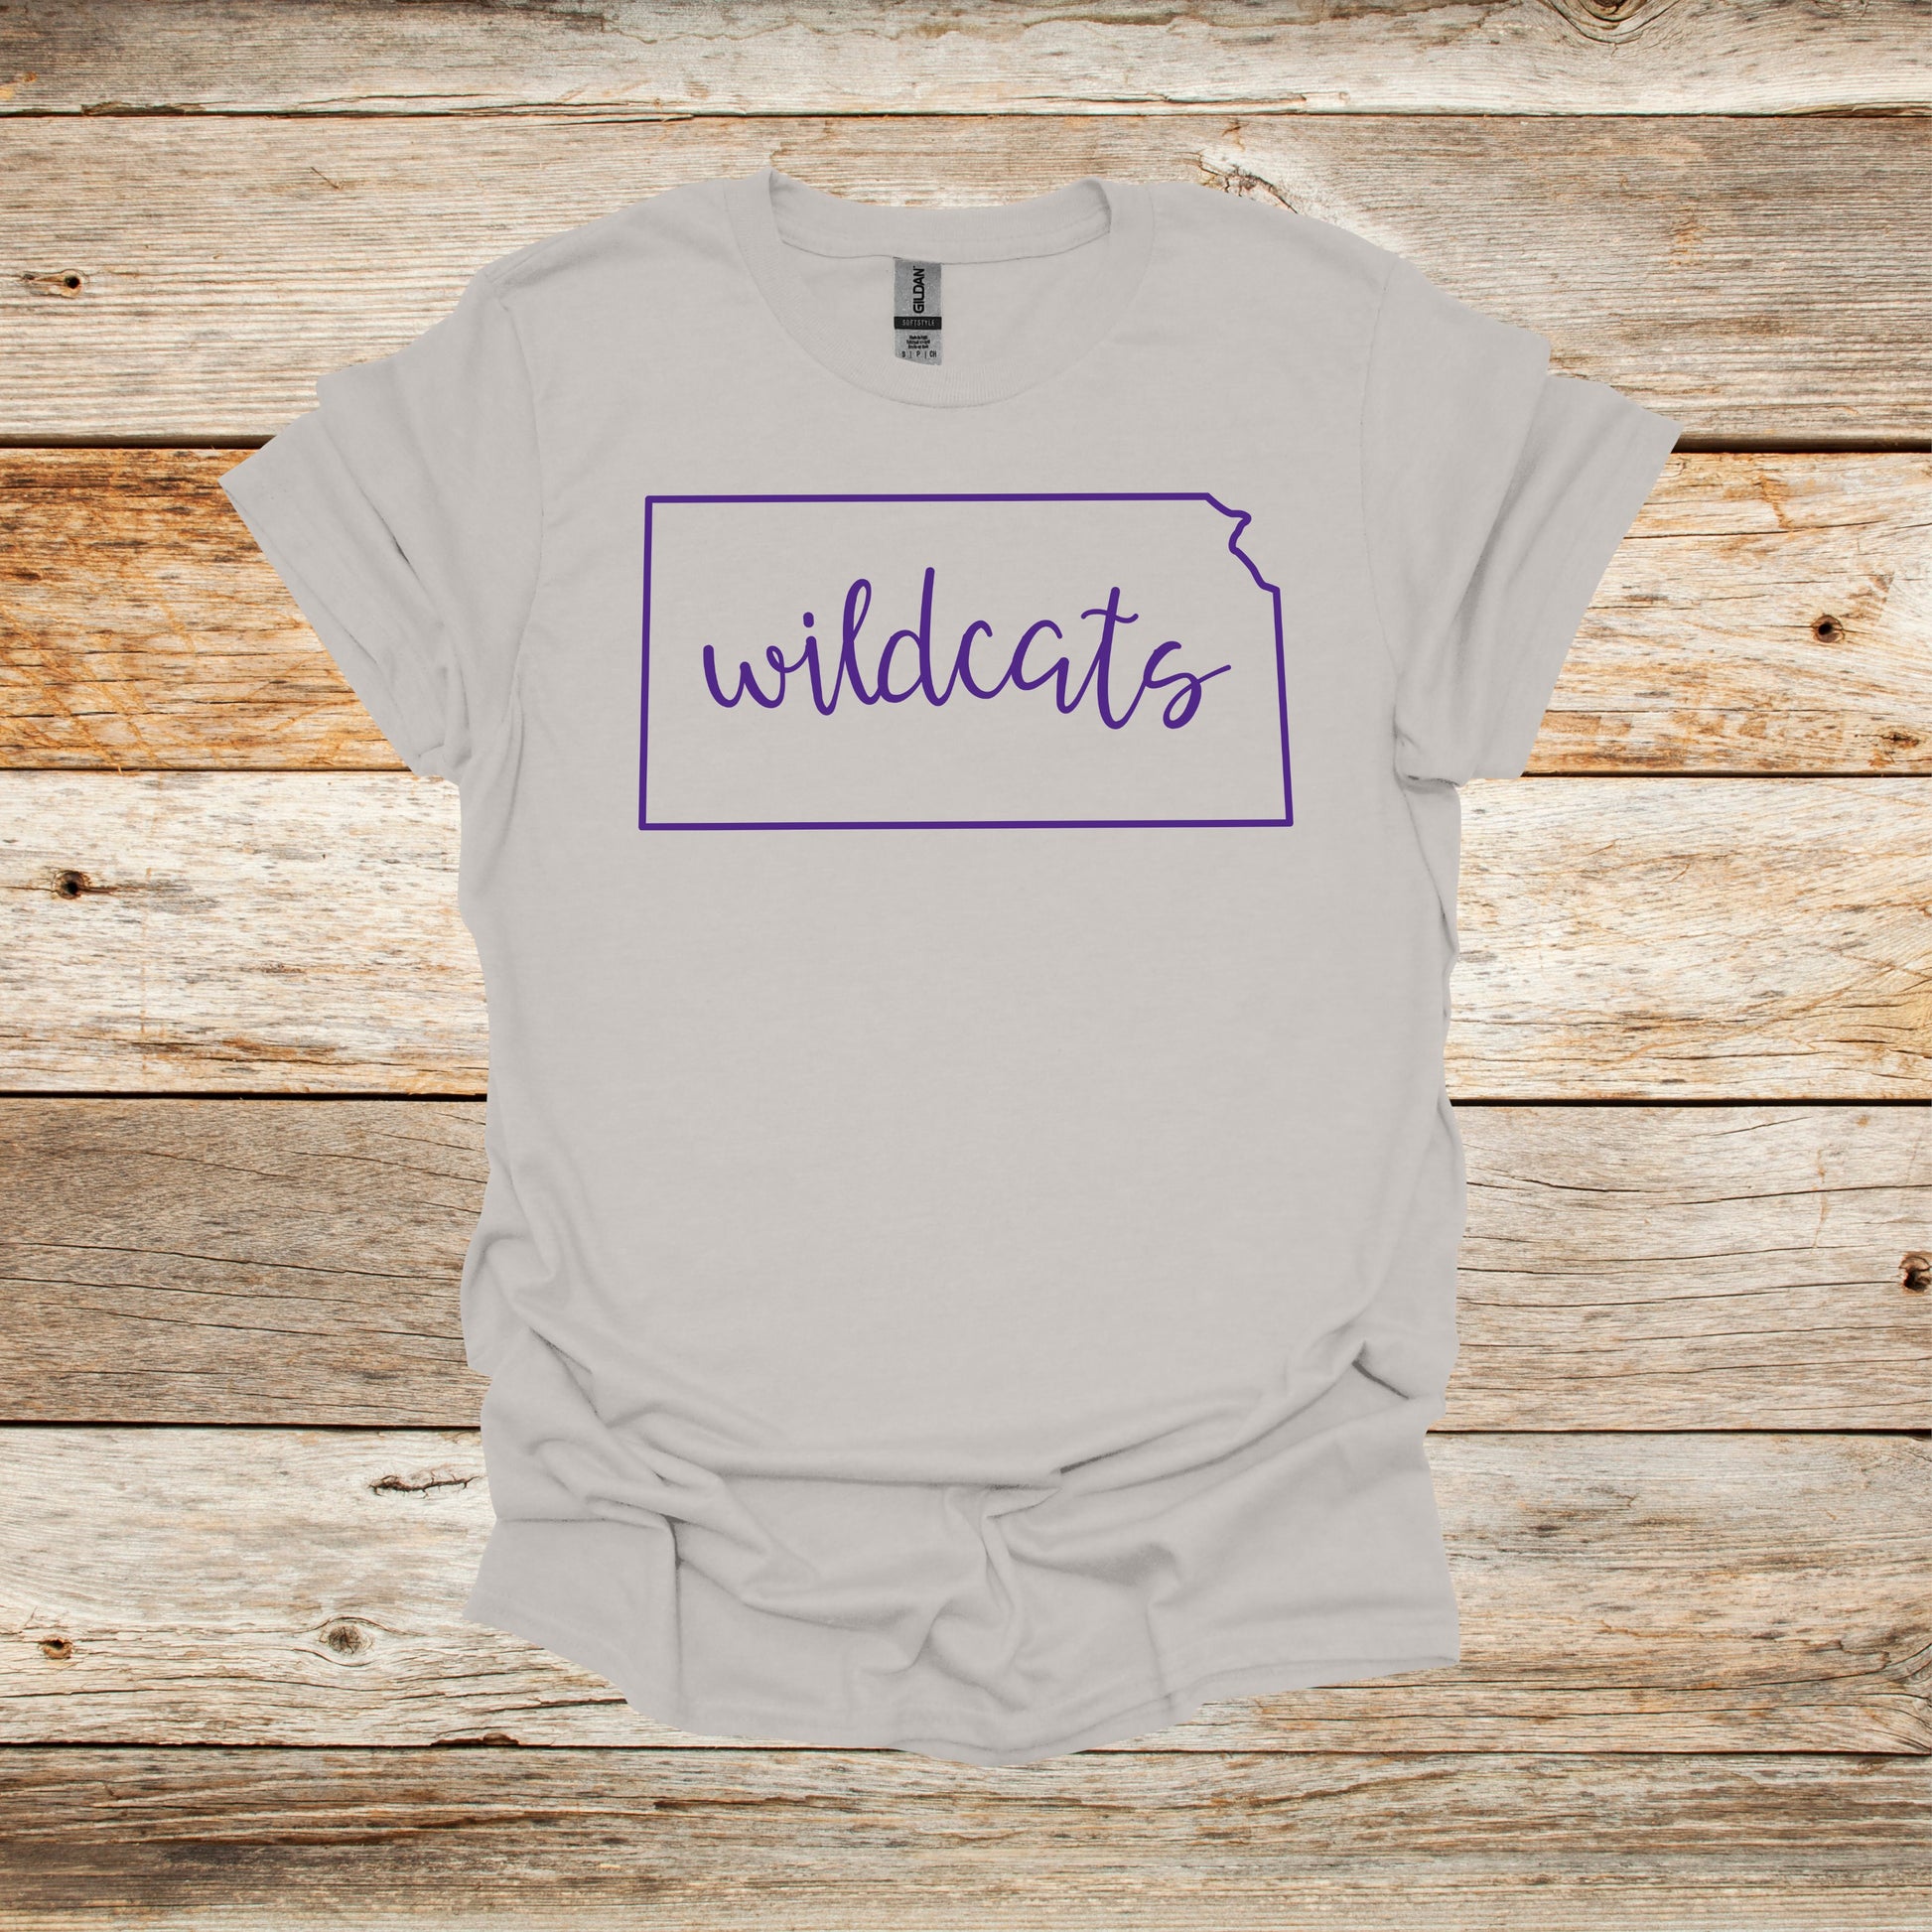 College T Shirt - Kansas State Wildcats - State Outline - Adult and Children's Tee Shirts T-Shirts Graphic Avenue Ice Grey Adult Small 